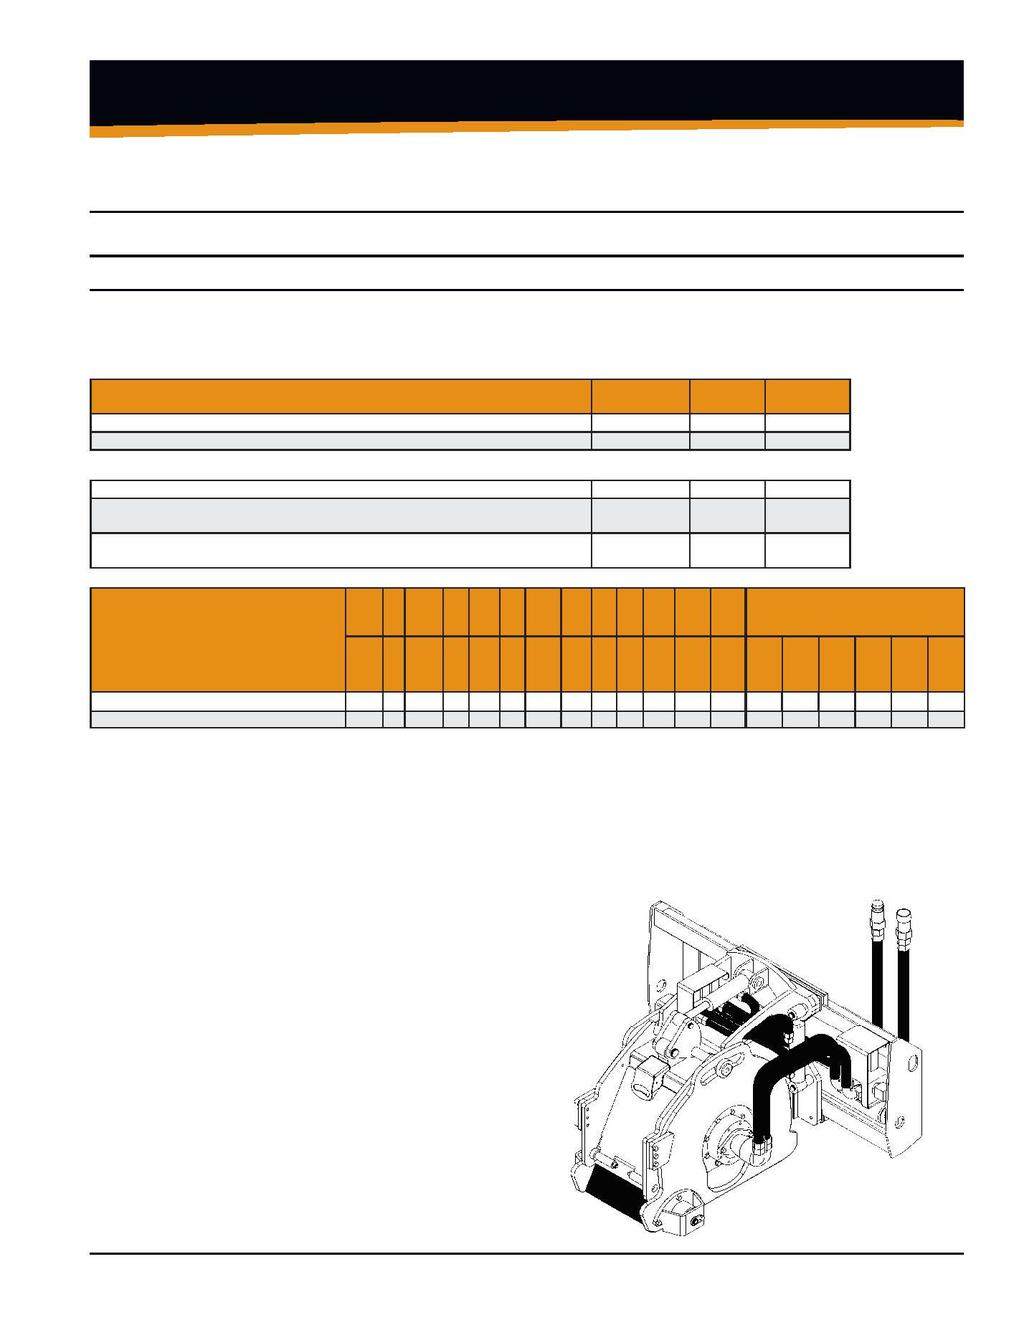 COLD PLANERS, STANDARD STANDARD COLD PLANER For specified skid-steer loaders equipped with standard auxiliary boom hydraulics.